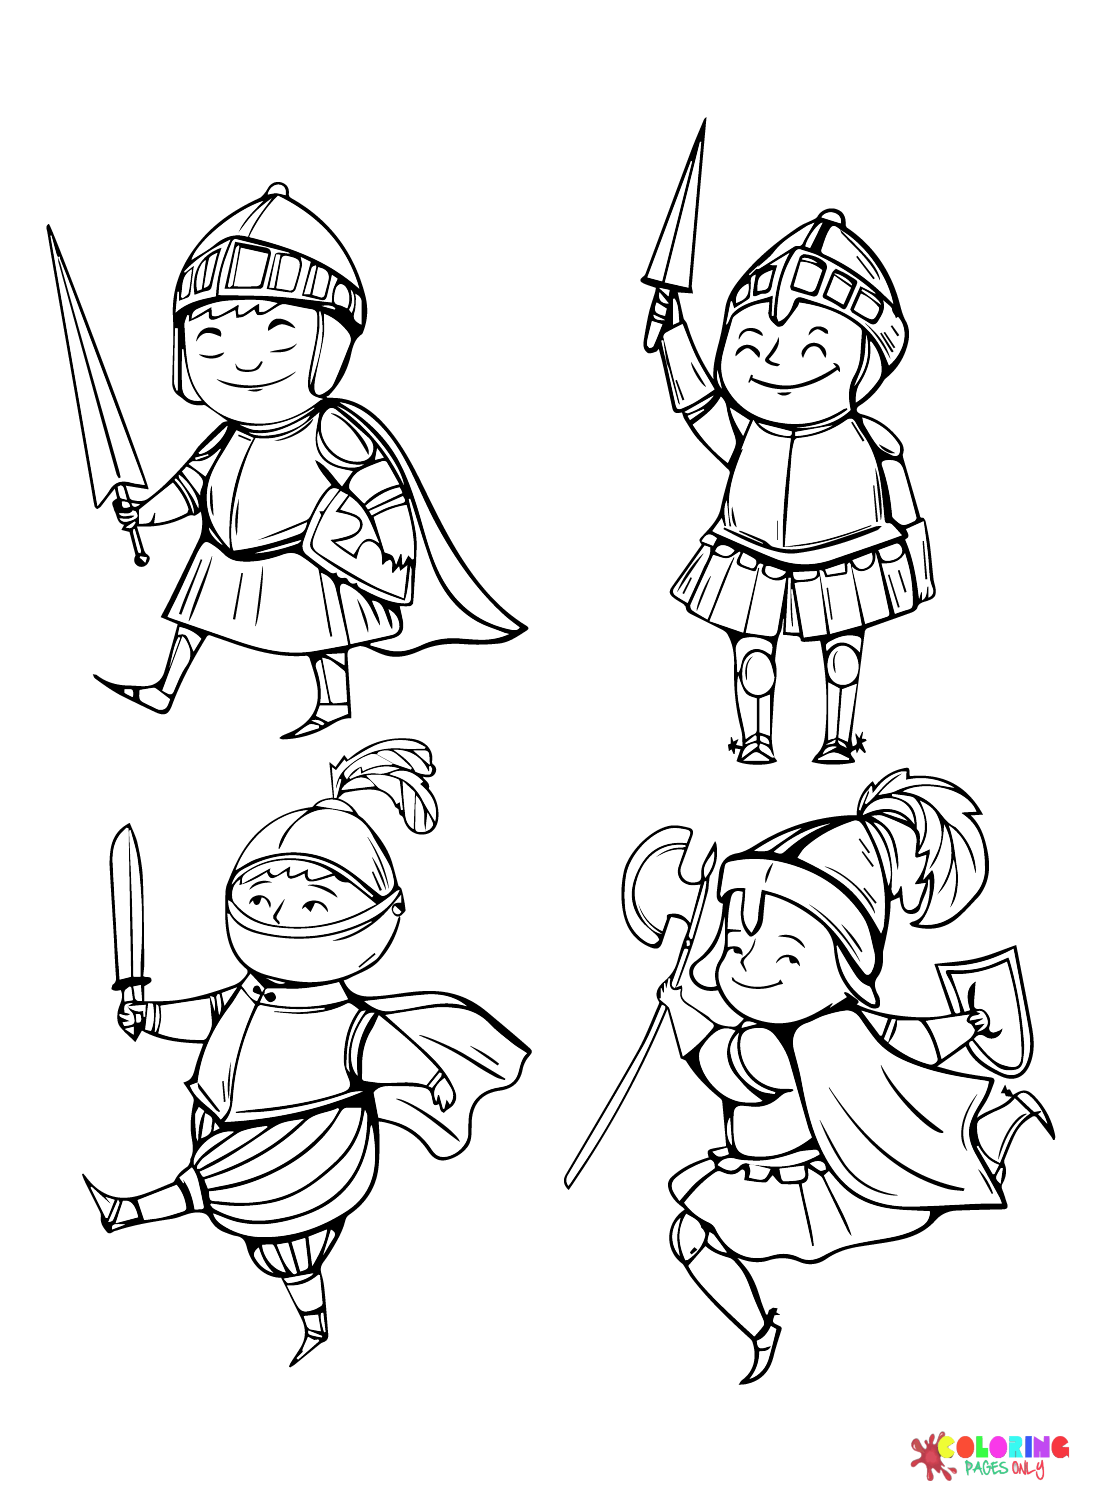 Free Vector Funny Drawings Knight Set Ancient Rome and Roman Empire from Ancient Rome and Roman Empire